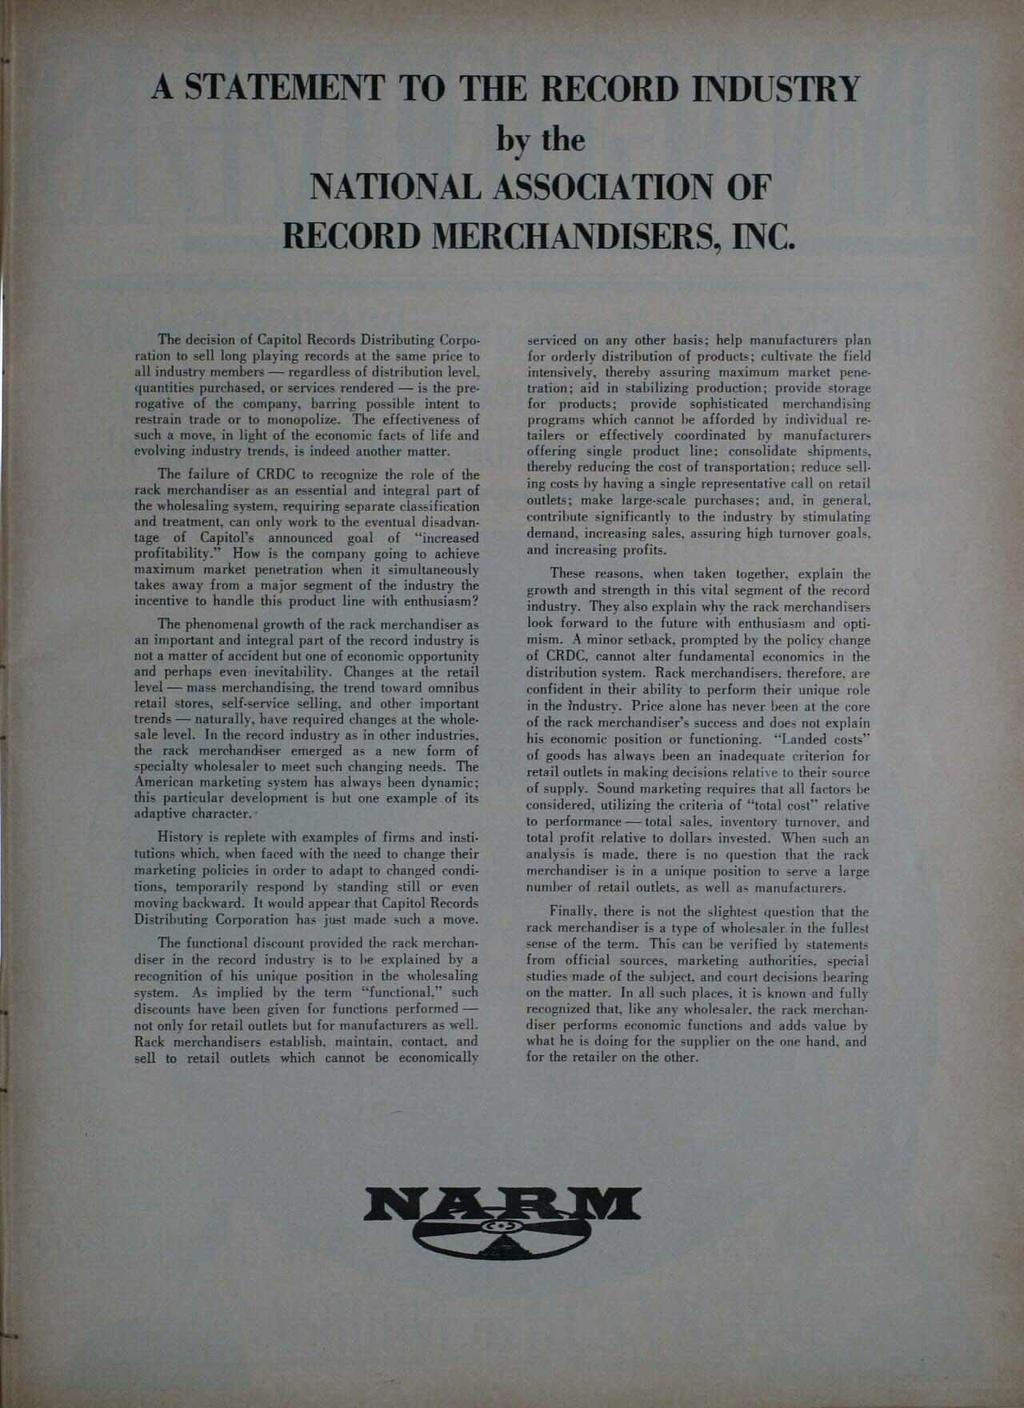 A STATEMENT TO THE RECORD INDUSTRY by the NATIONAL ASSOCIATION OF RECORD MERCHANDISERS, INC.